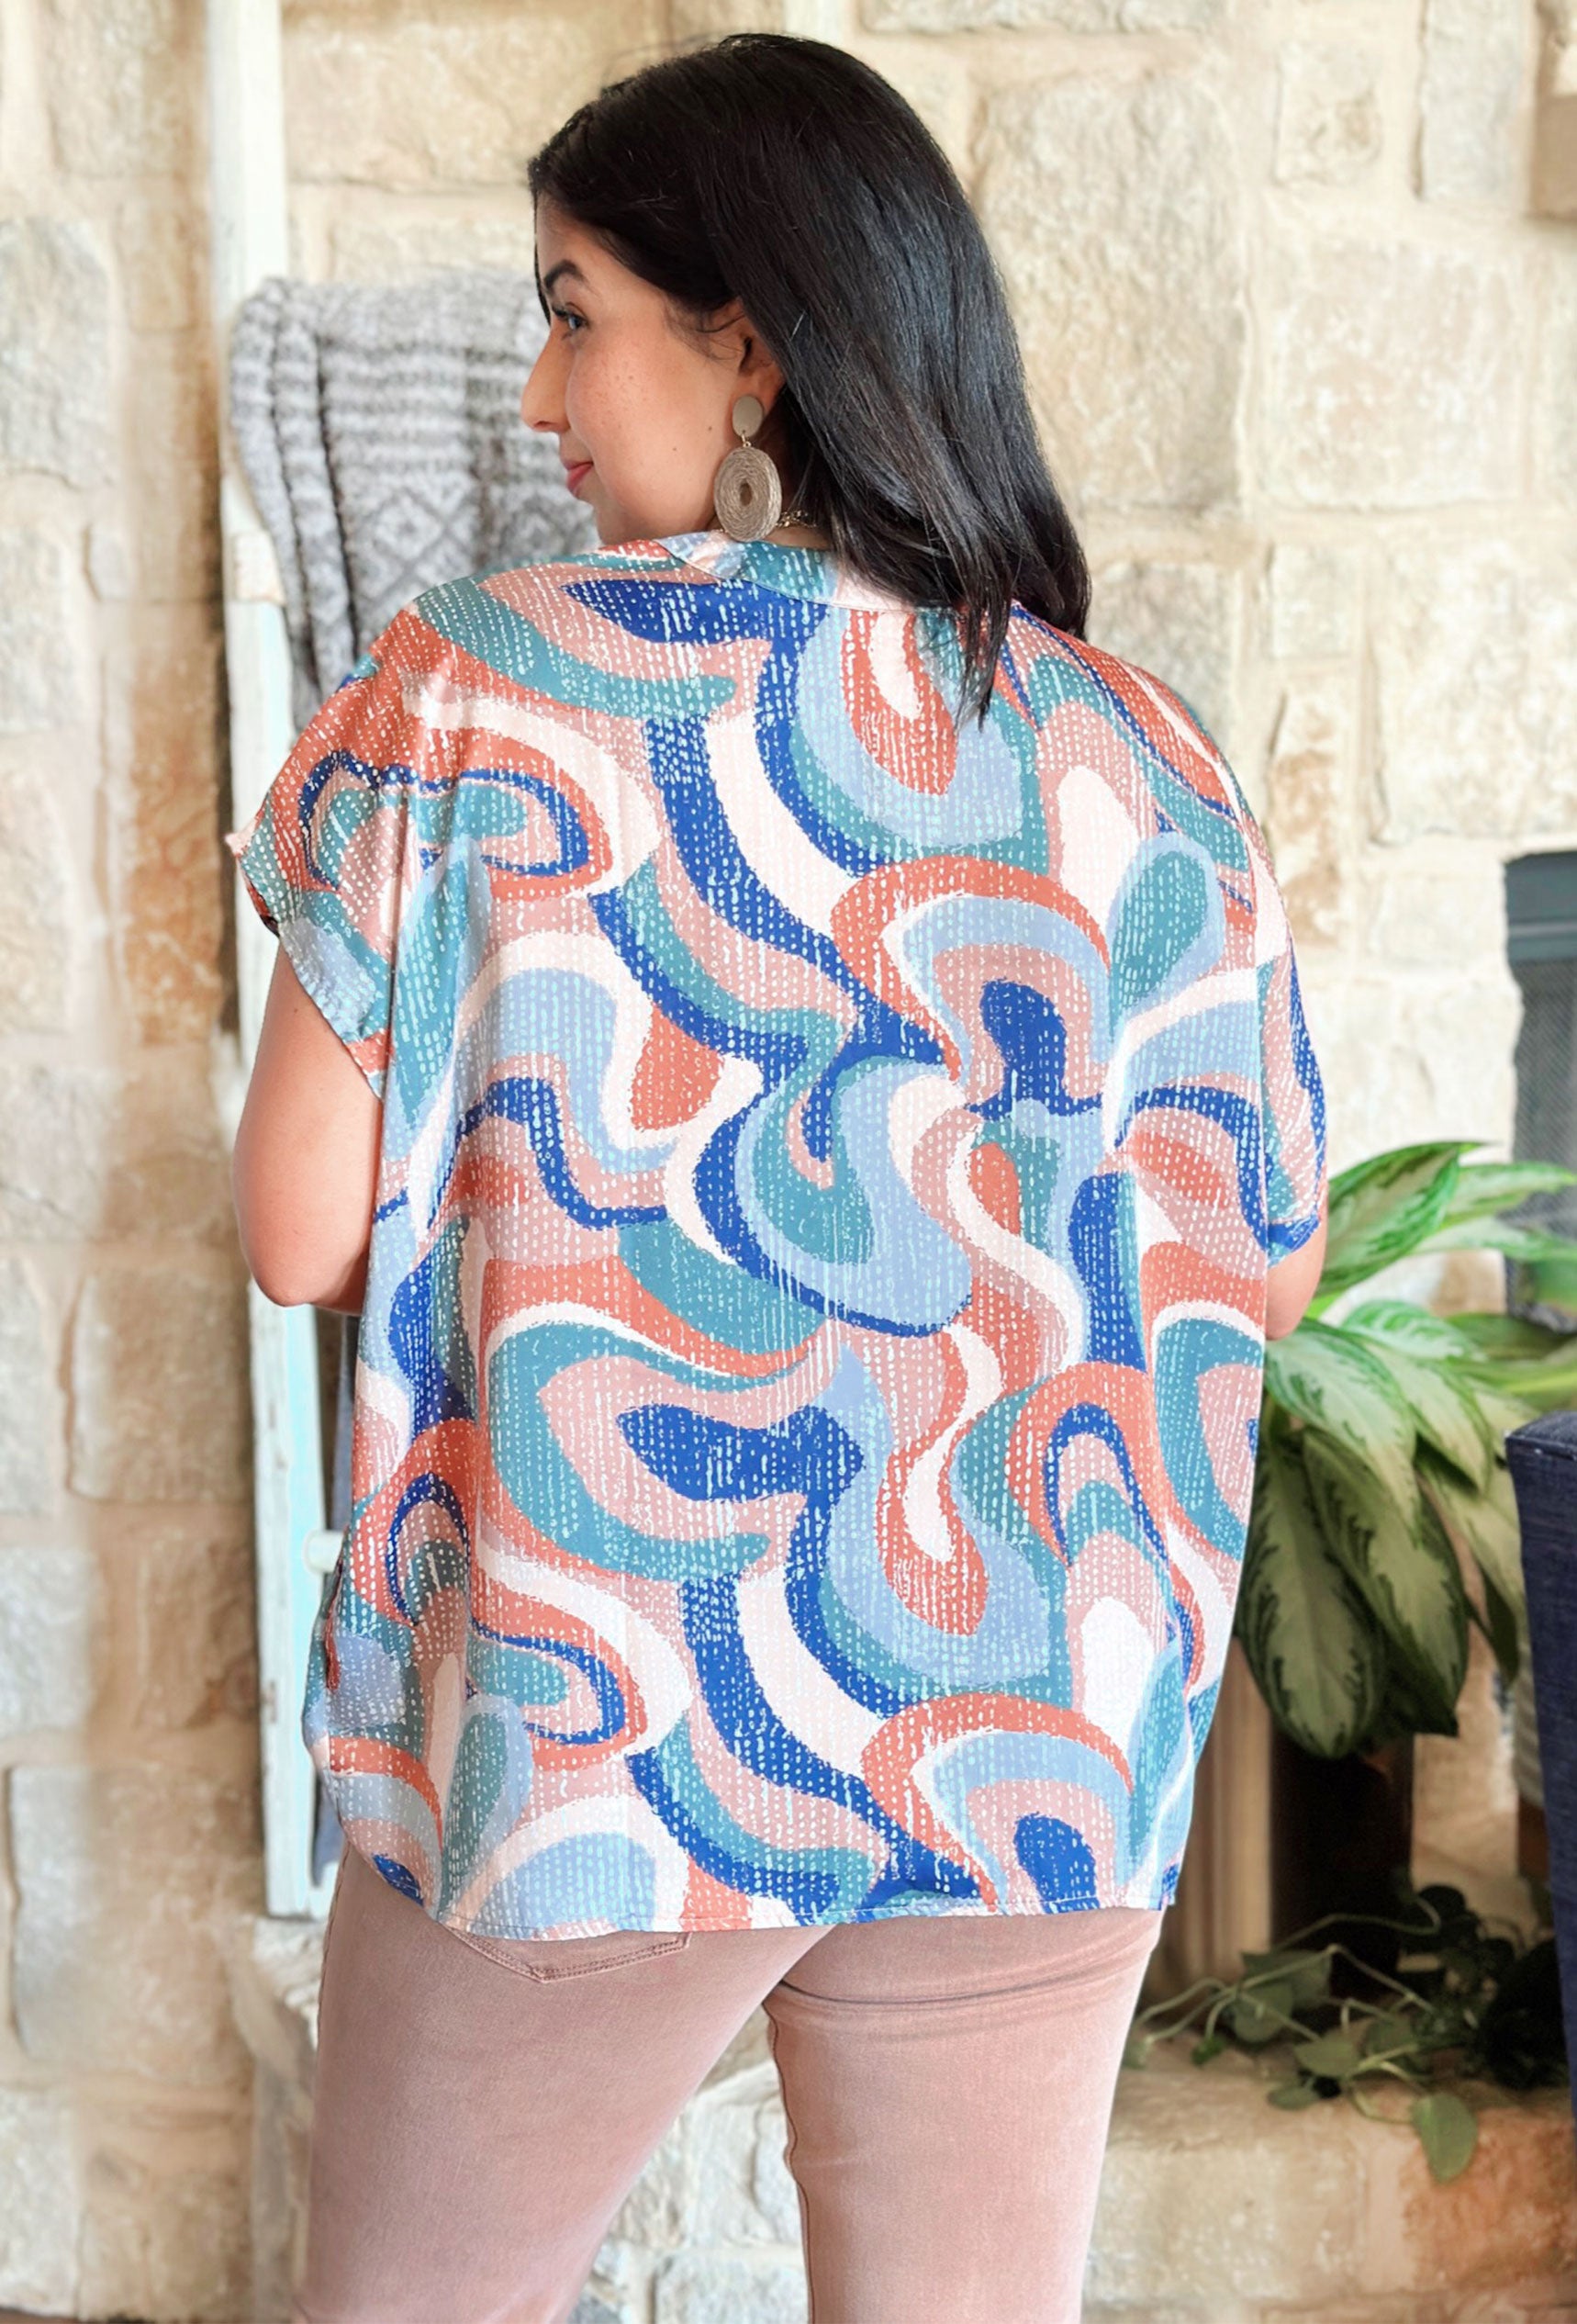 Take Your Time Blouse, Blue, sage, terracotta, and cream abstract line blouse with V-neck line  